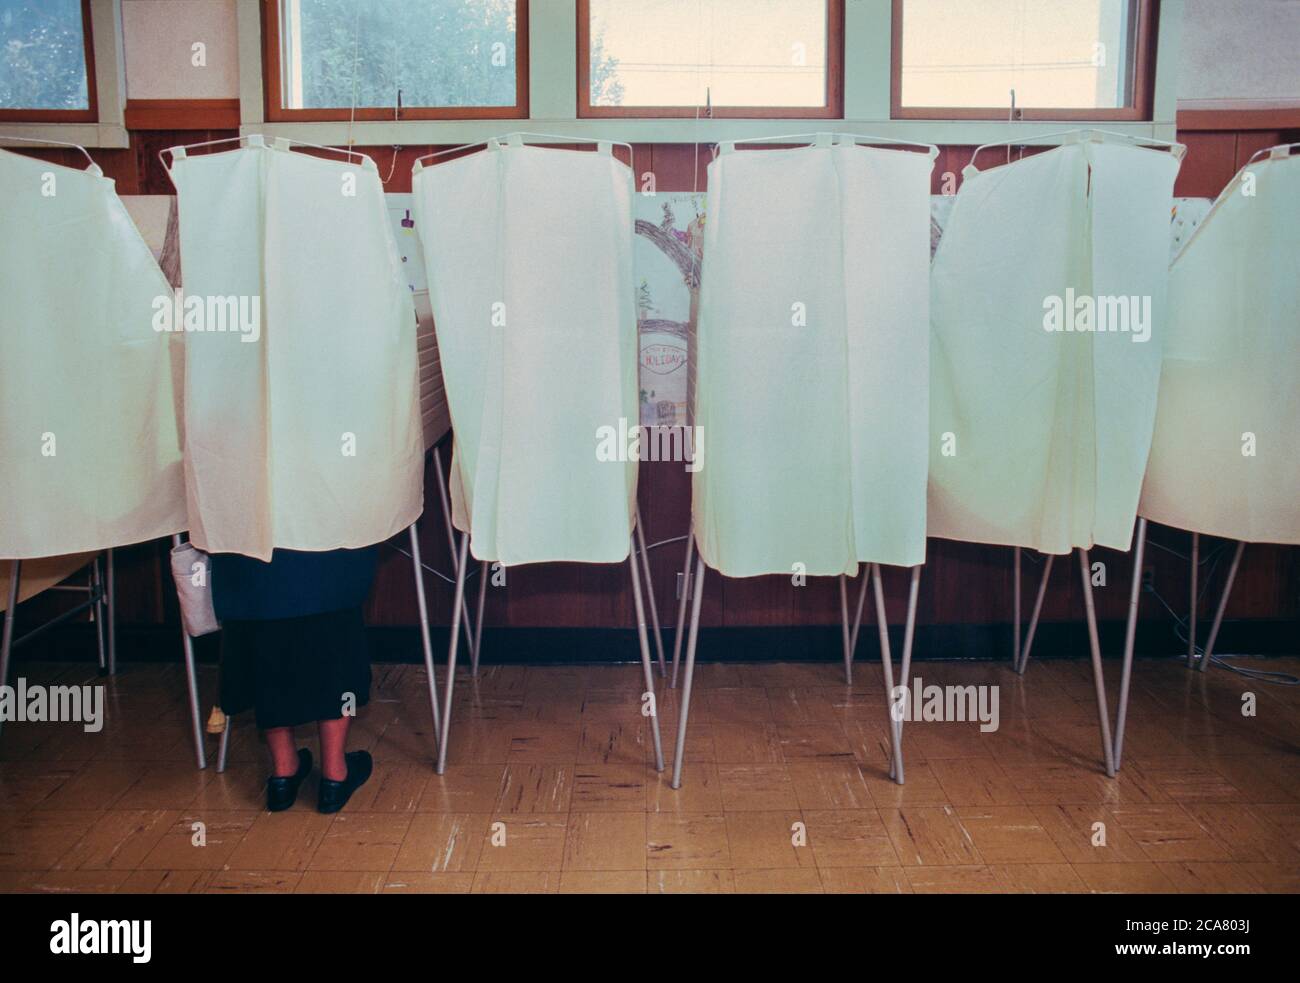 Elderly woman marking her ballot in a voting booth during the November 1988 U.S. presidential Election.  San Francisco, California, USA Stock Photo